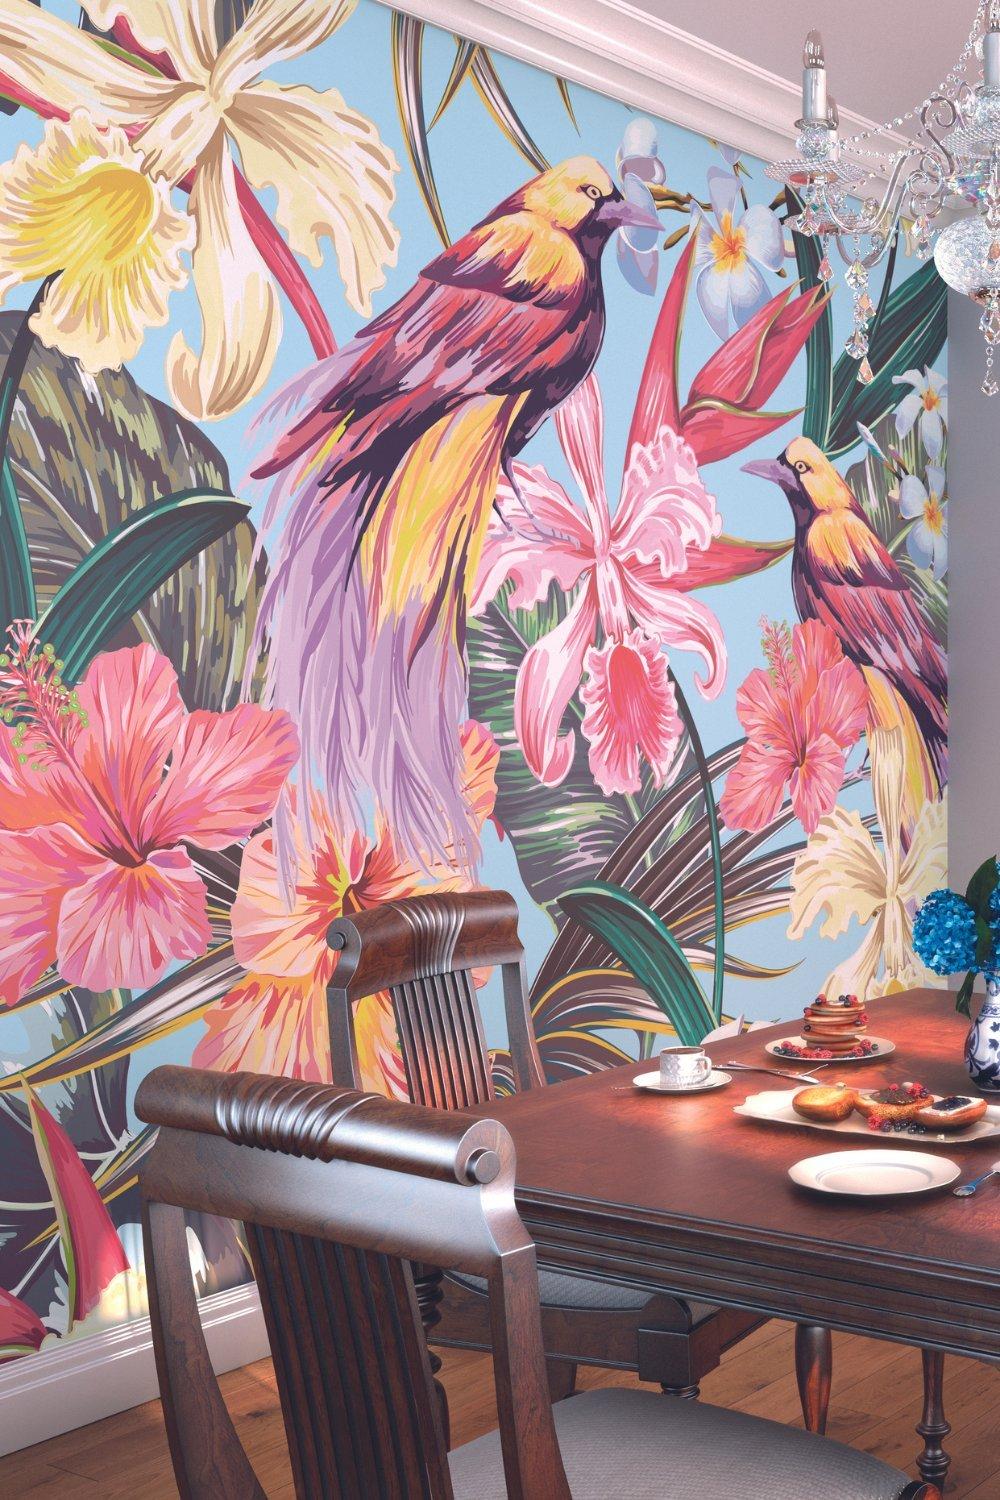 Birds and Flowers Multi Matt Smooth Paste the Wall Mural 350cm wide x 280cm high